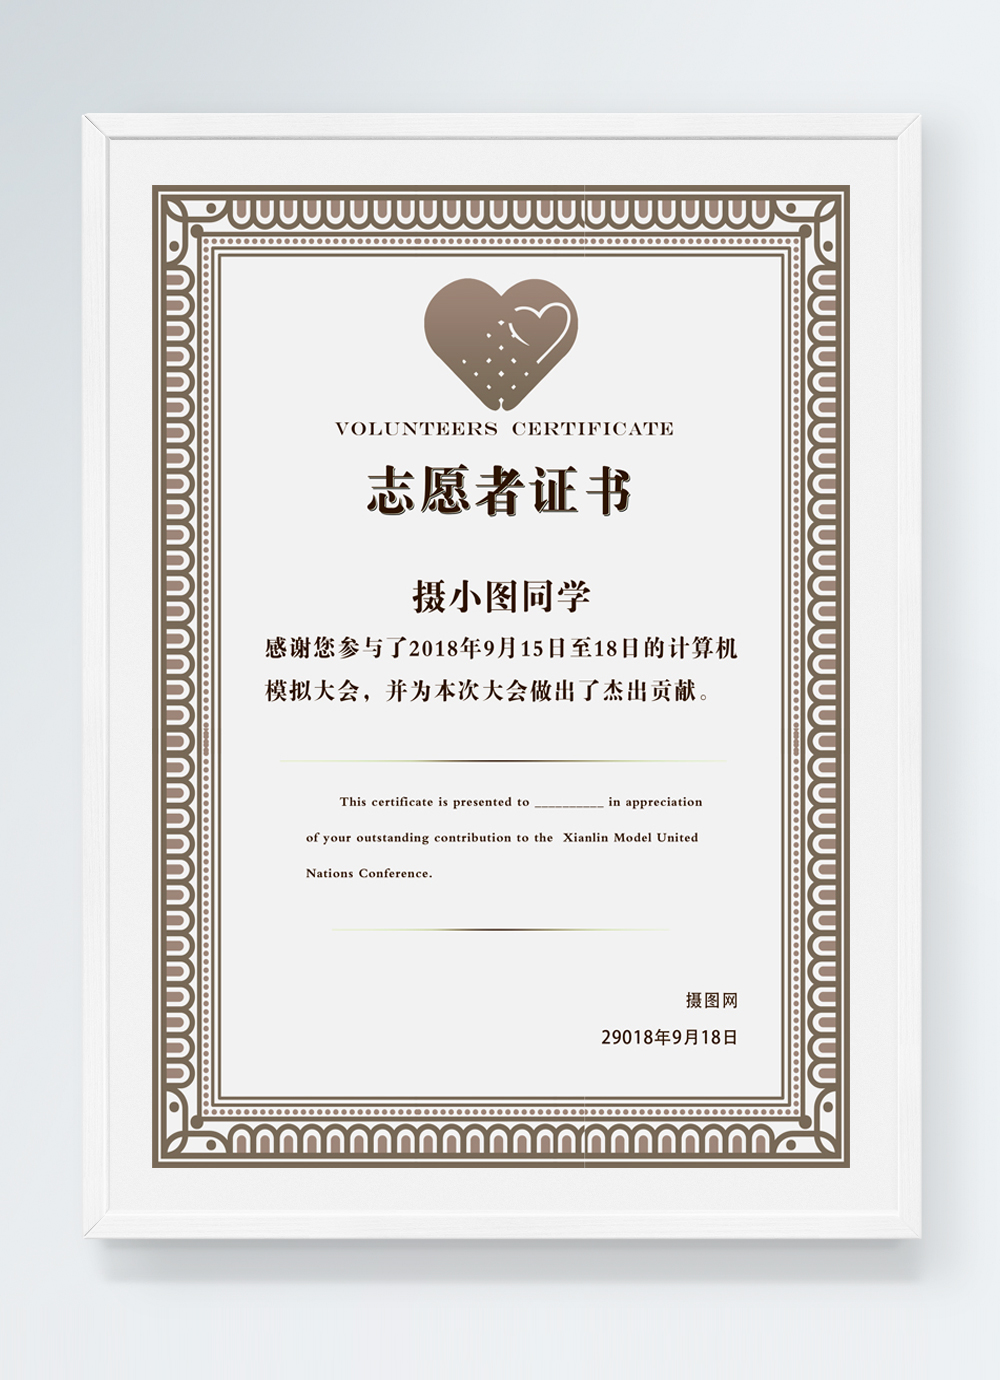 Volunteer certificate template image_picture free download Intended For Volunteer Certificate Templates